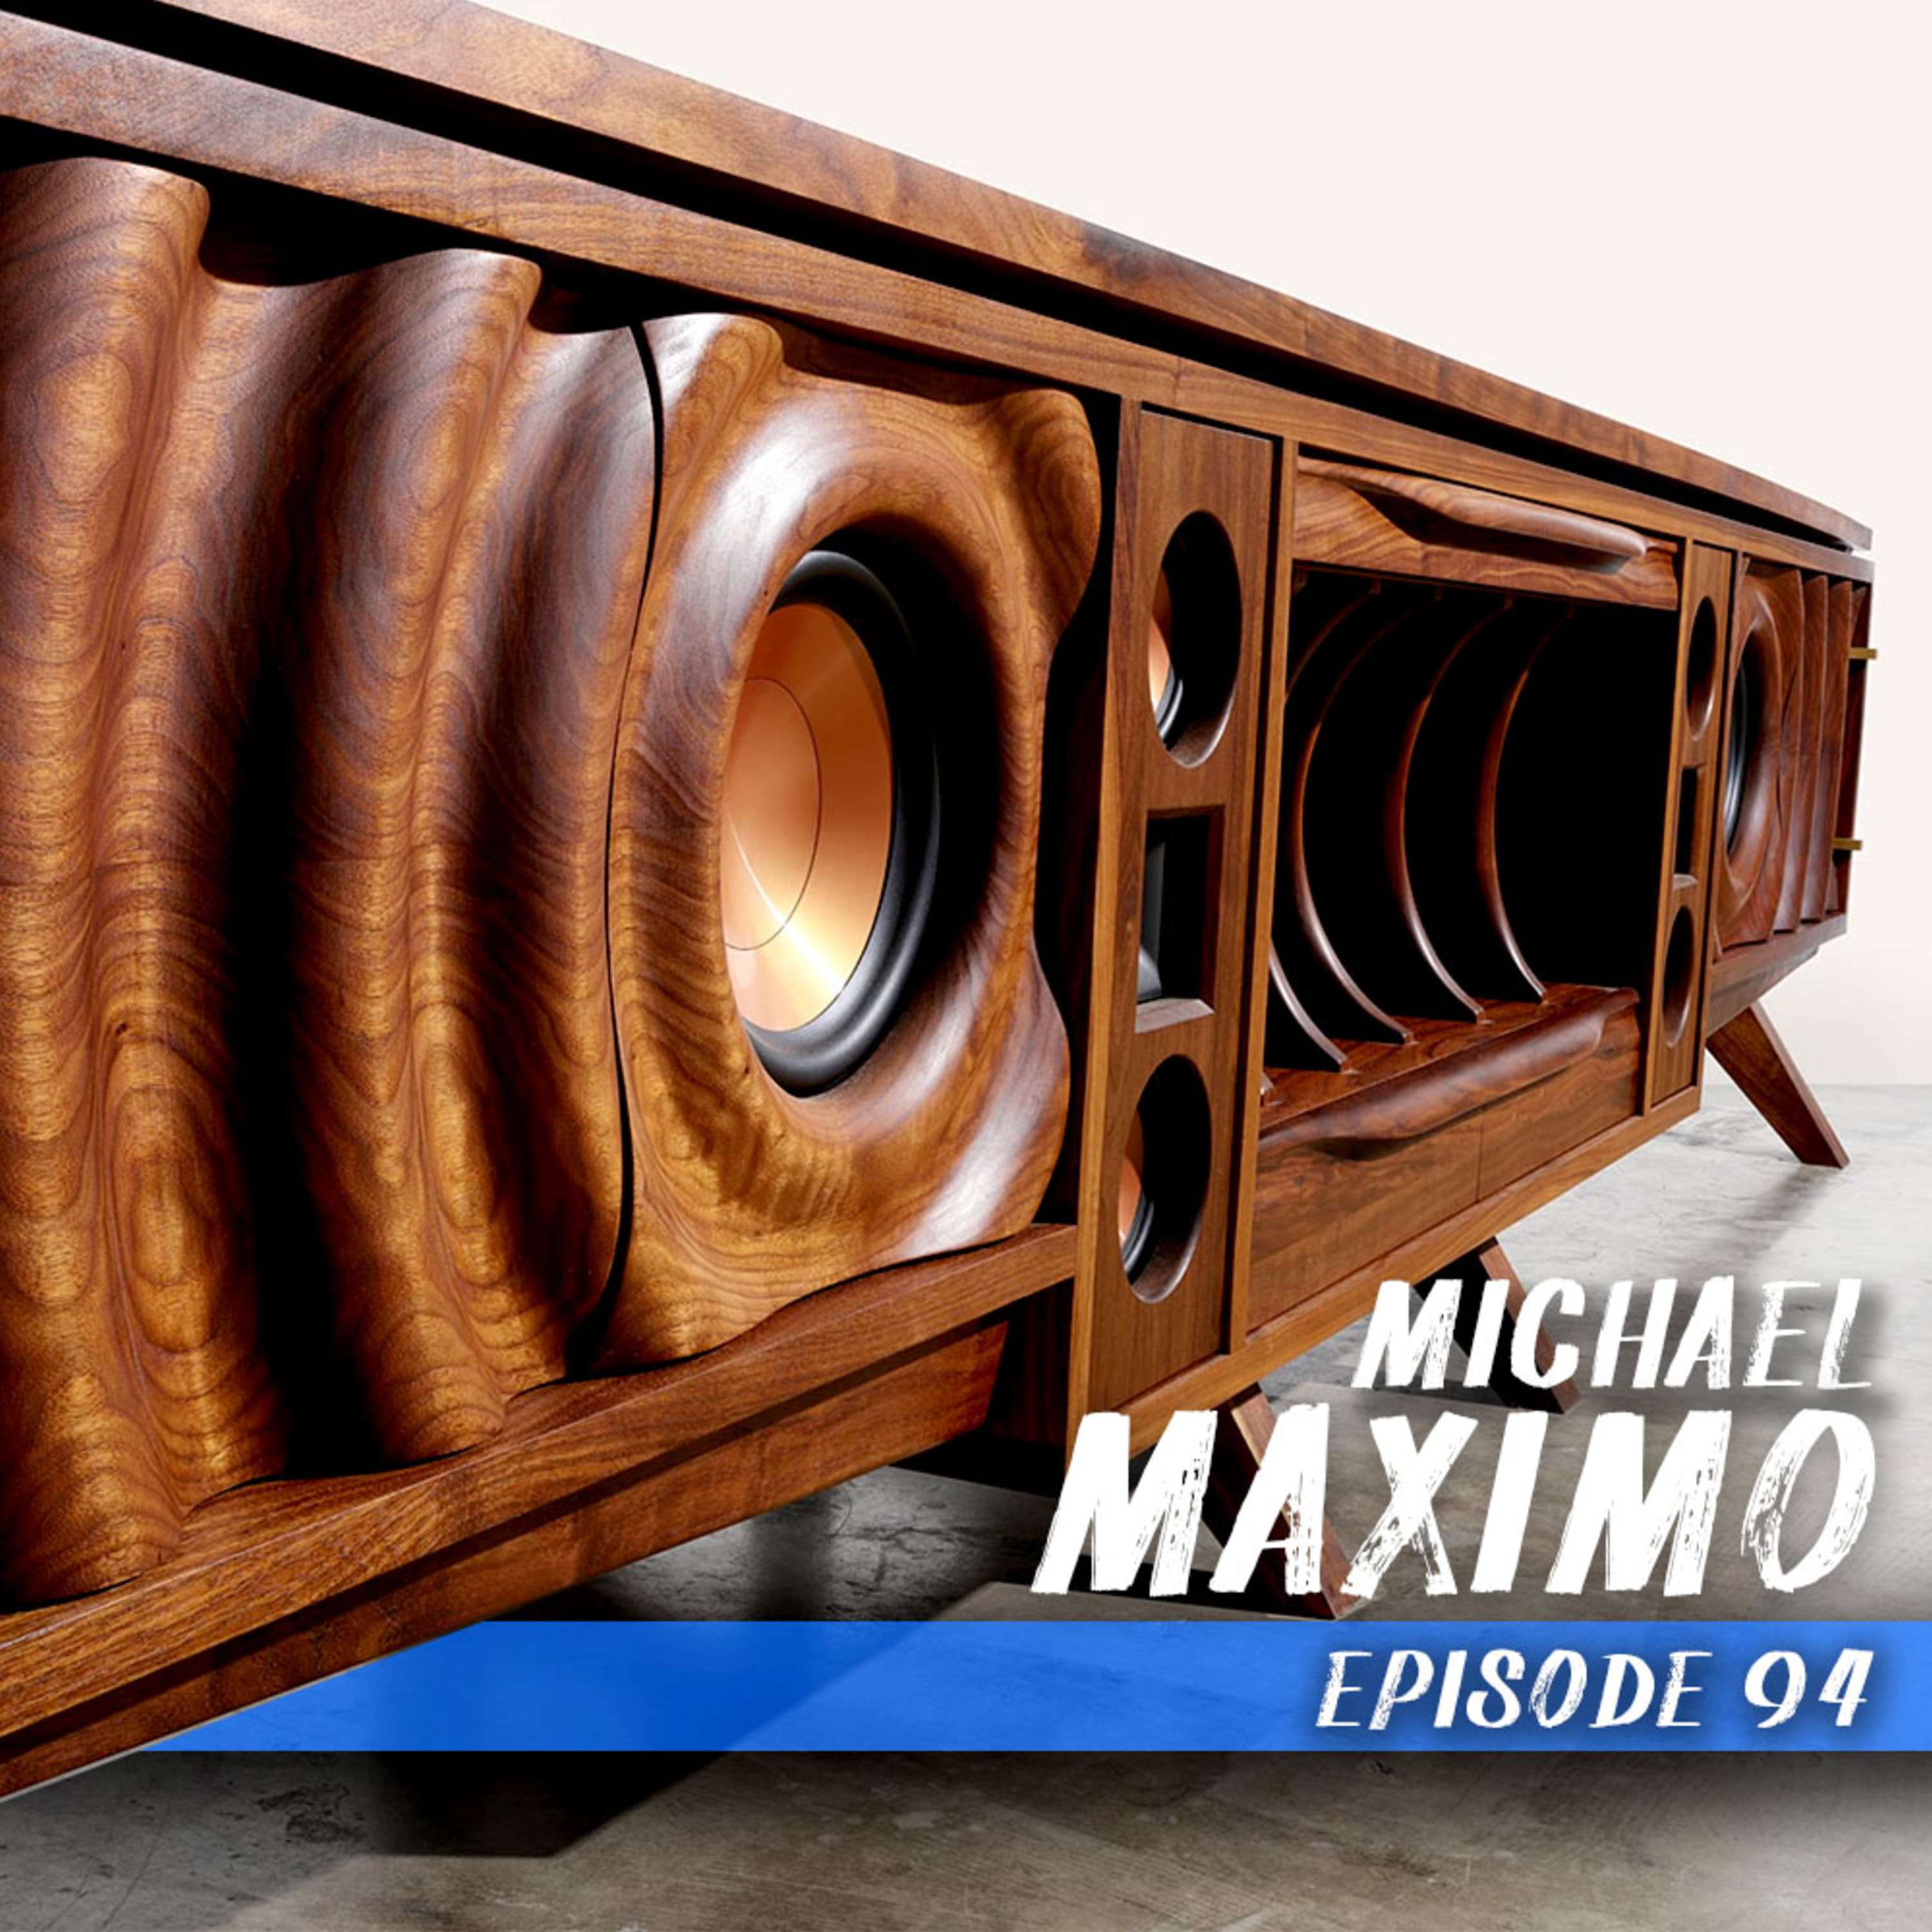 Fine Woodworking and High Tech Tools with Michael Maximo